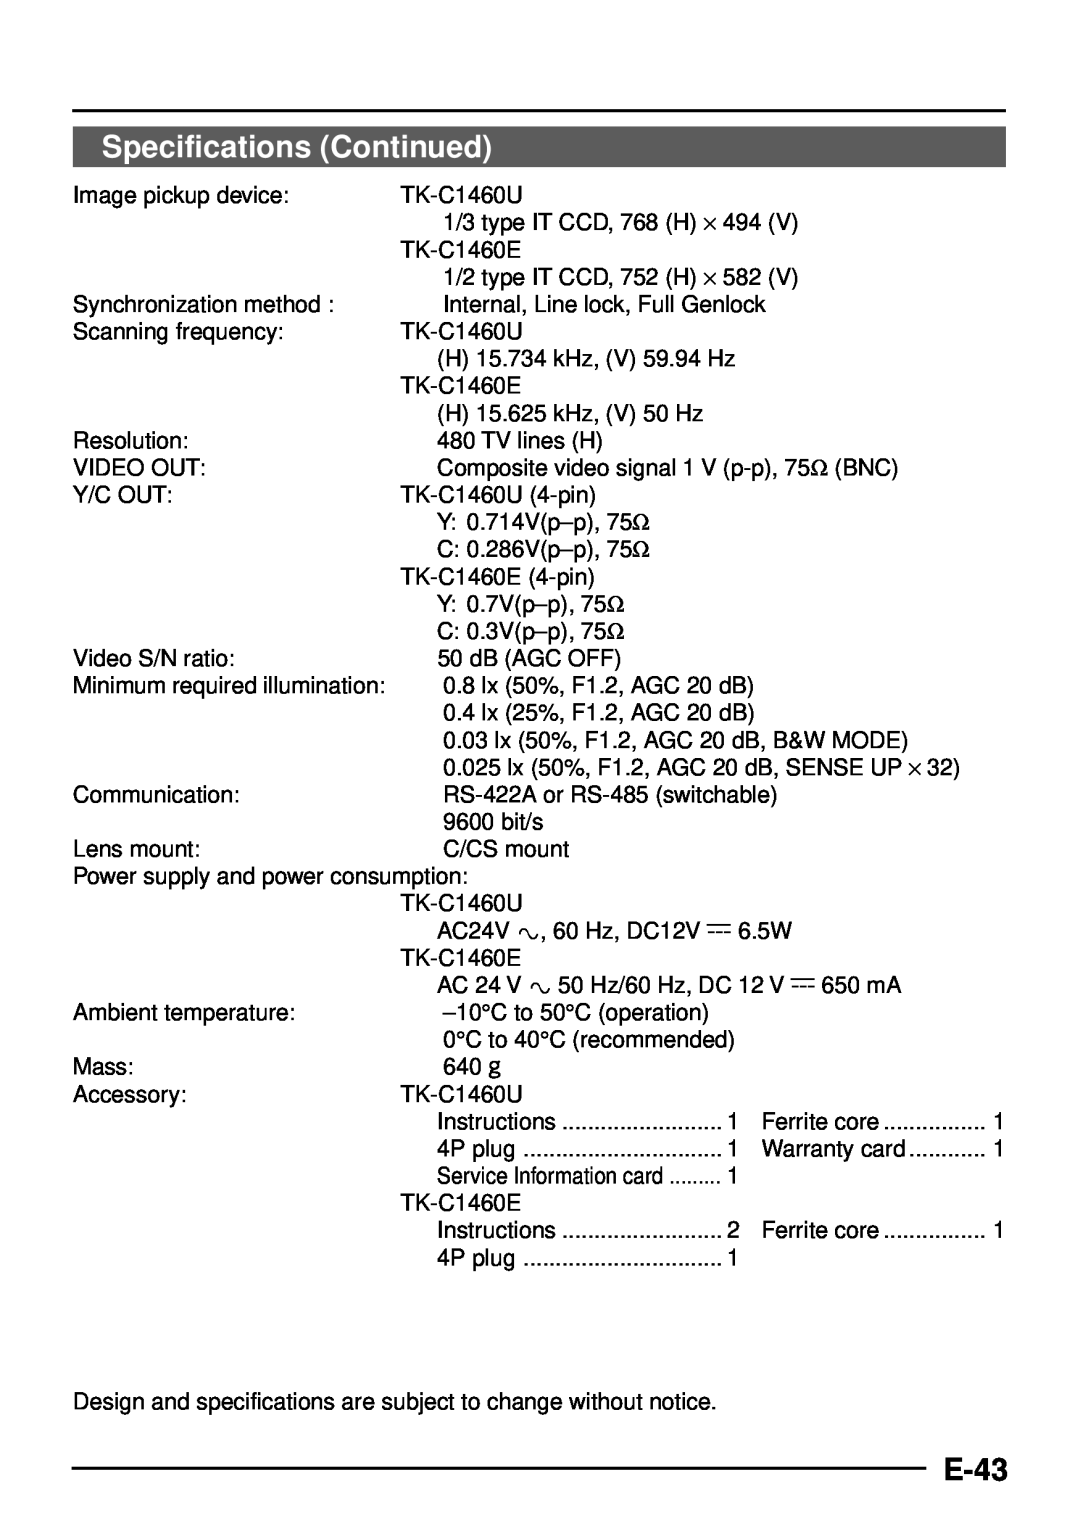 JVC TK-C1460 manual Specifications Continued, E-43 